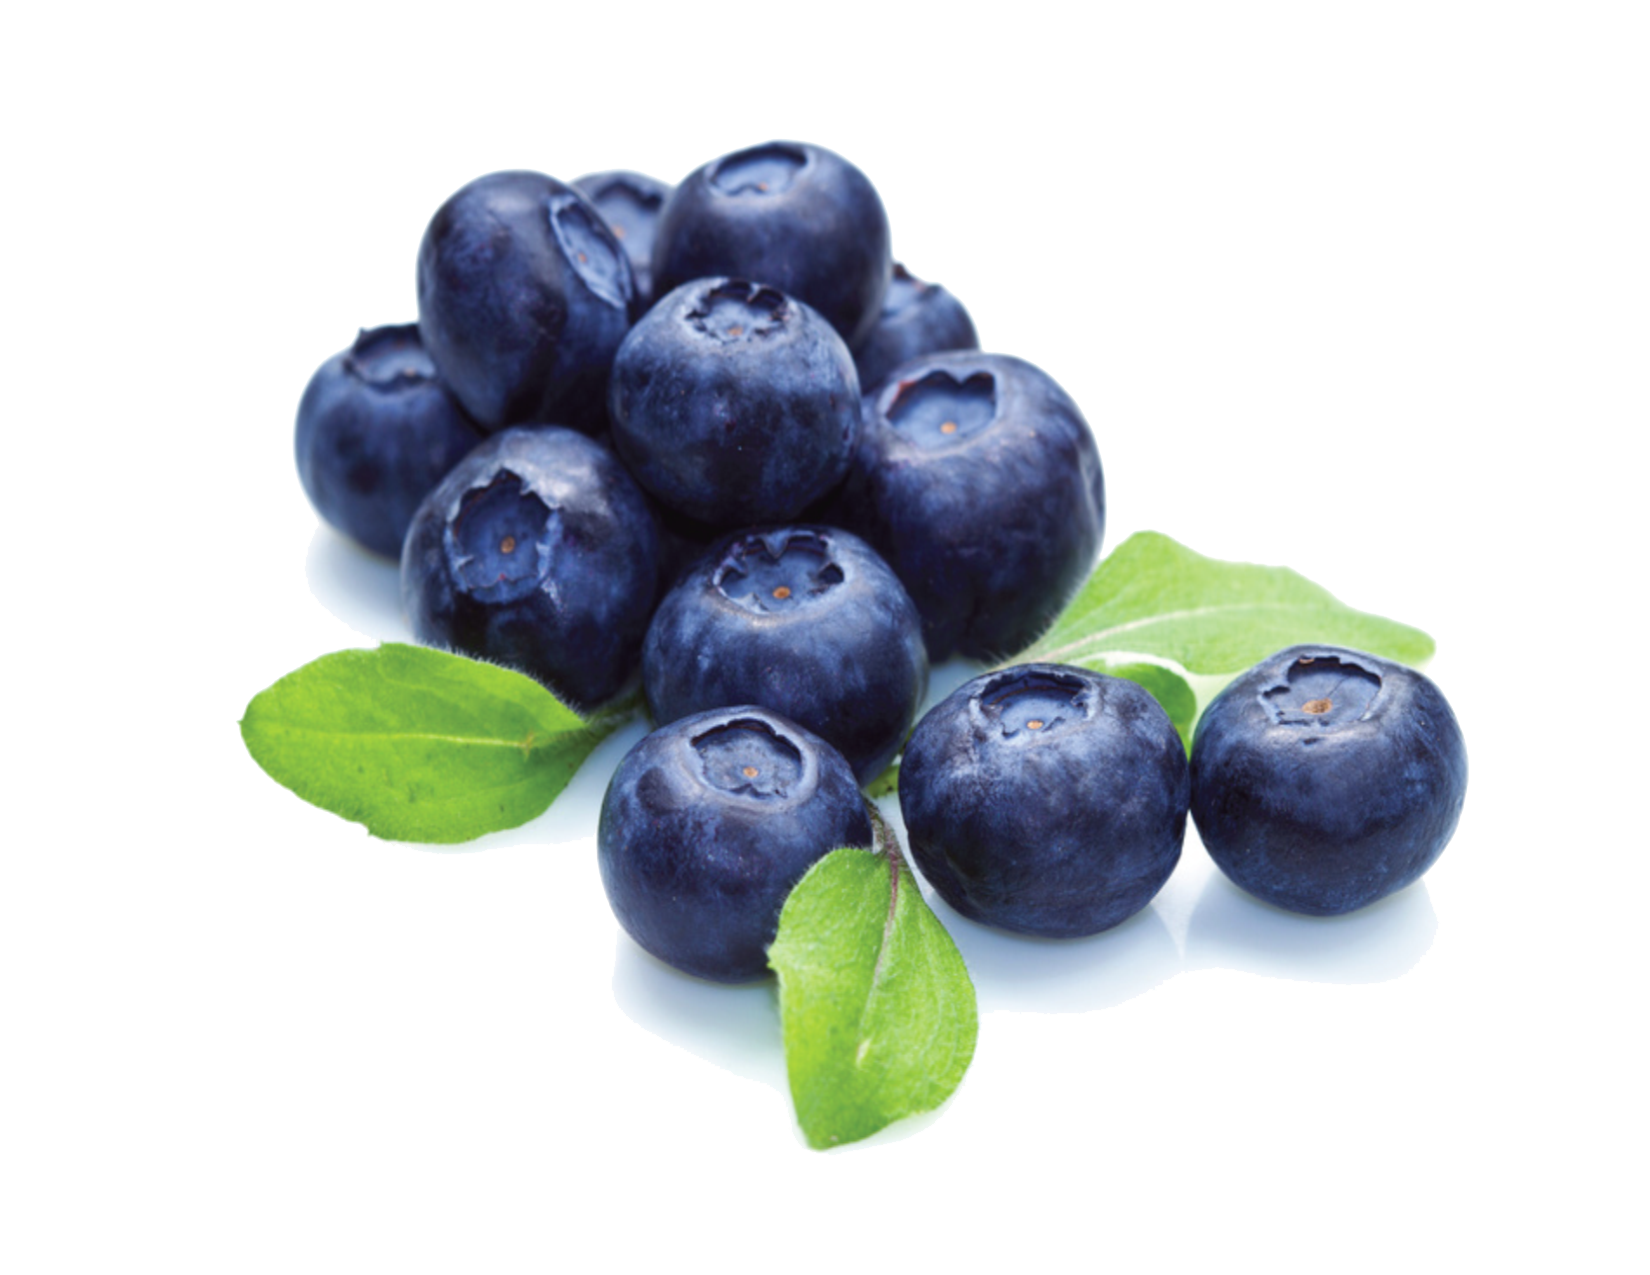 Png images transparent free. Blueberry clipart huckleberry